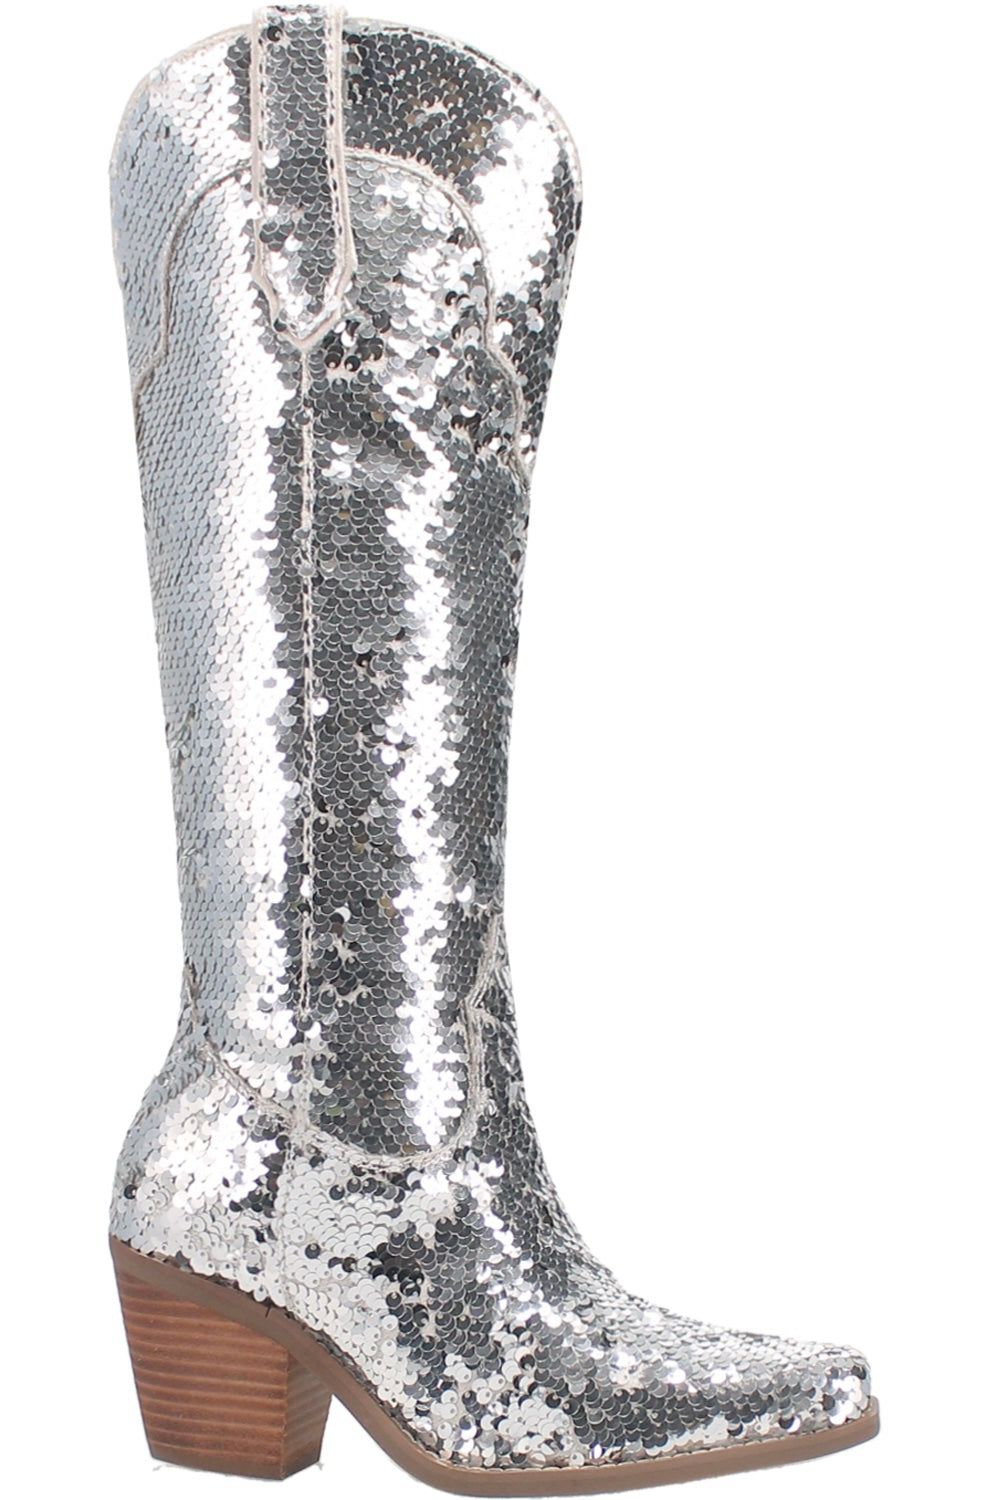 Dance Hall Queen Fabric Boot in Silver